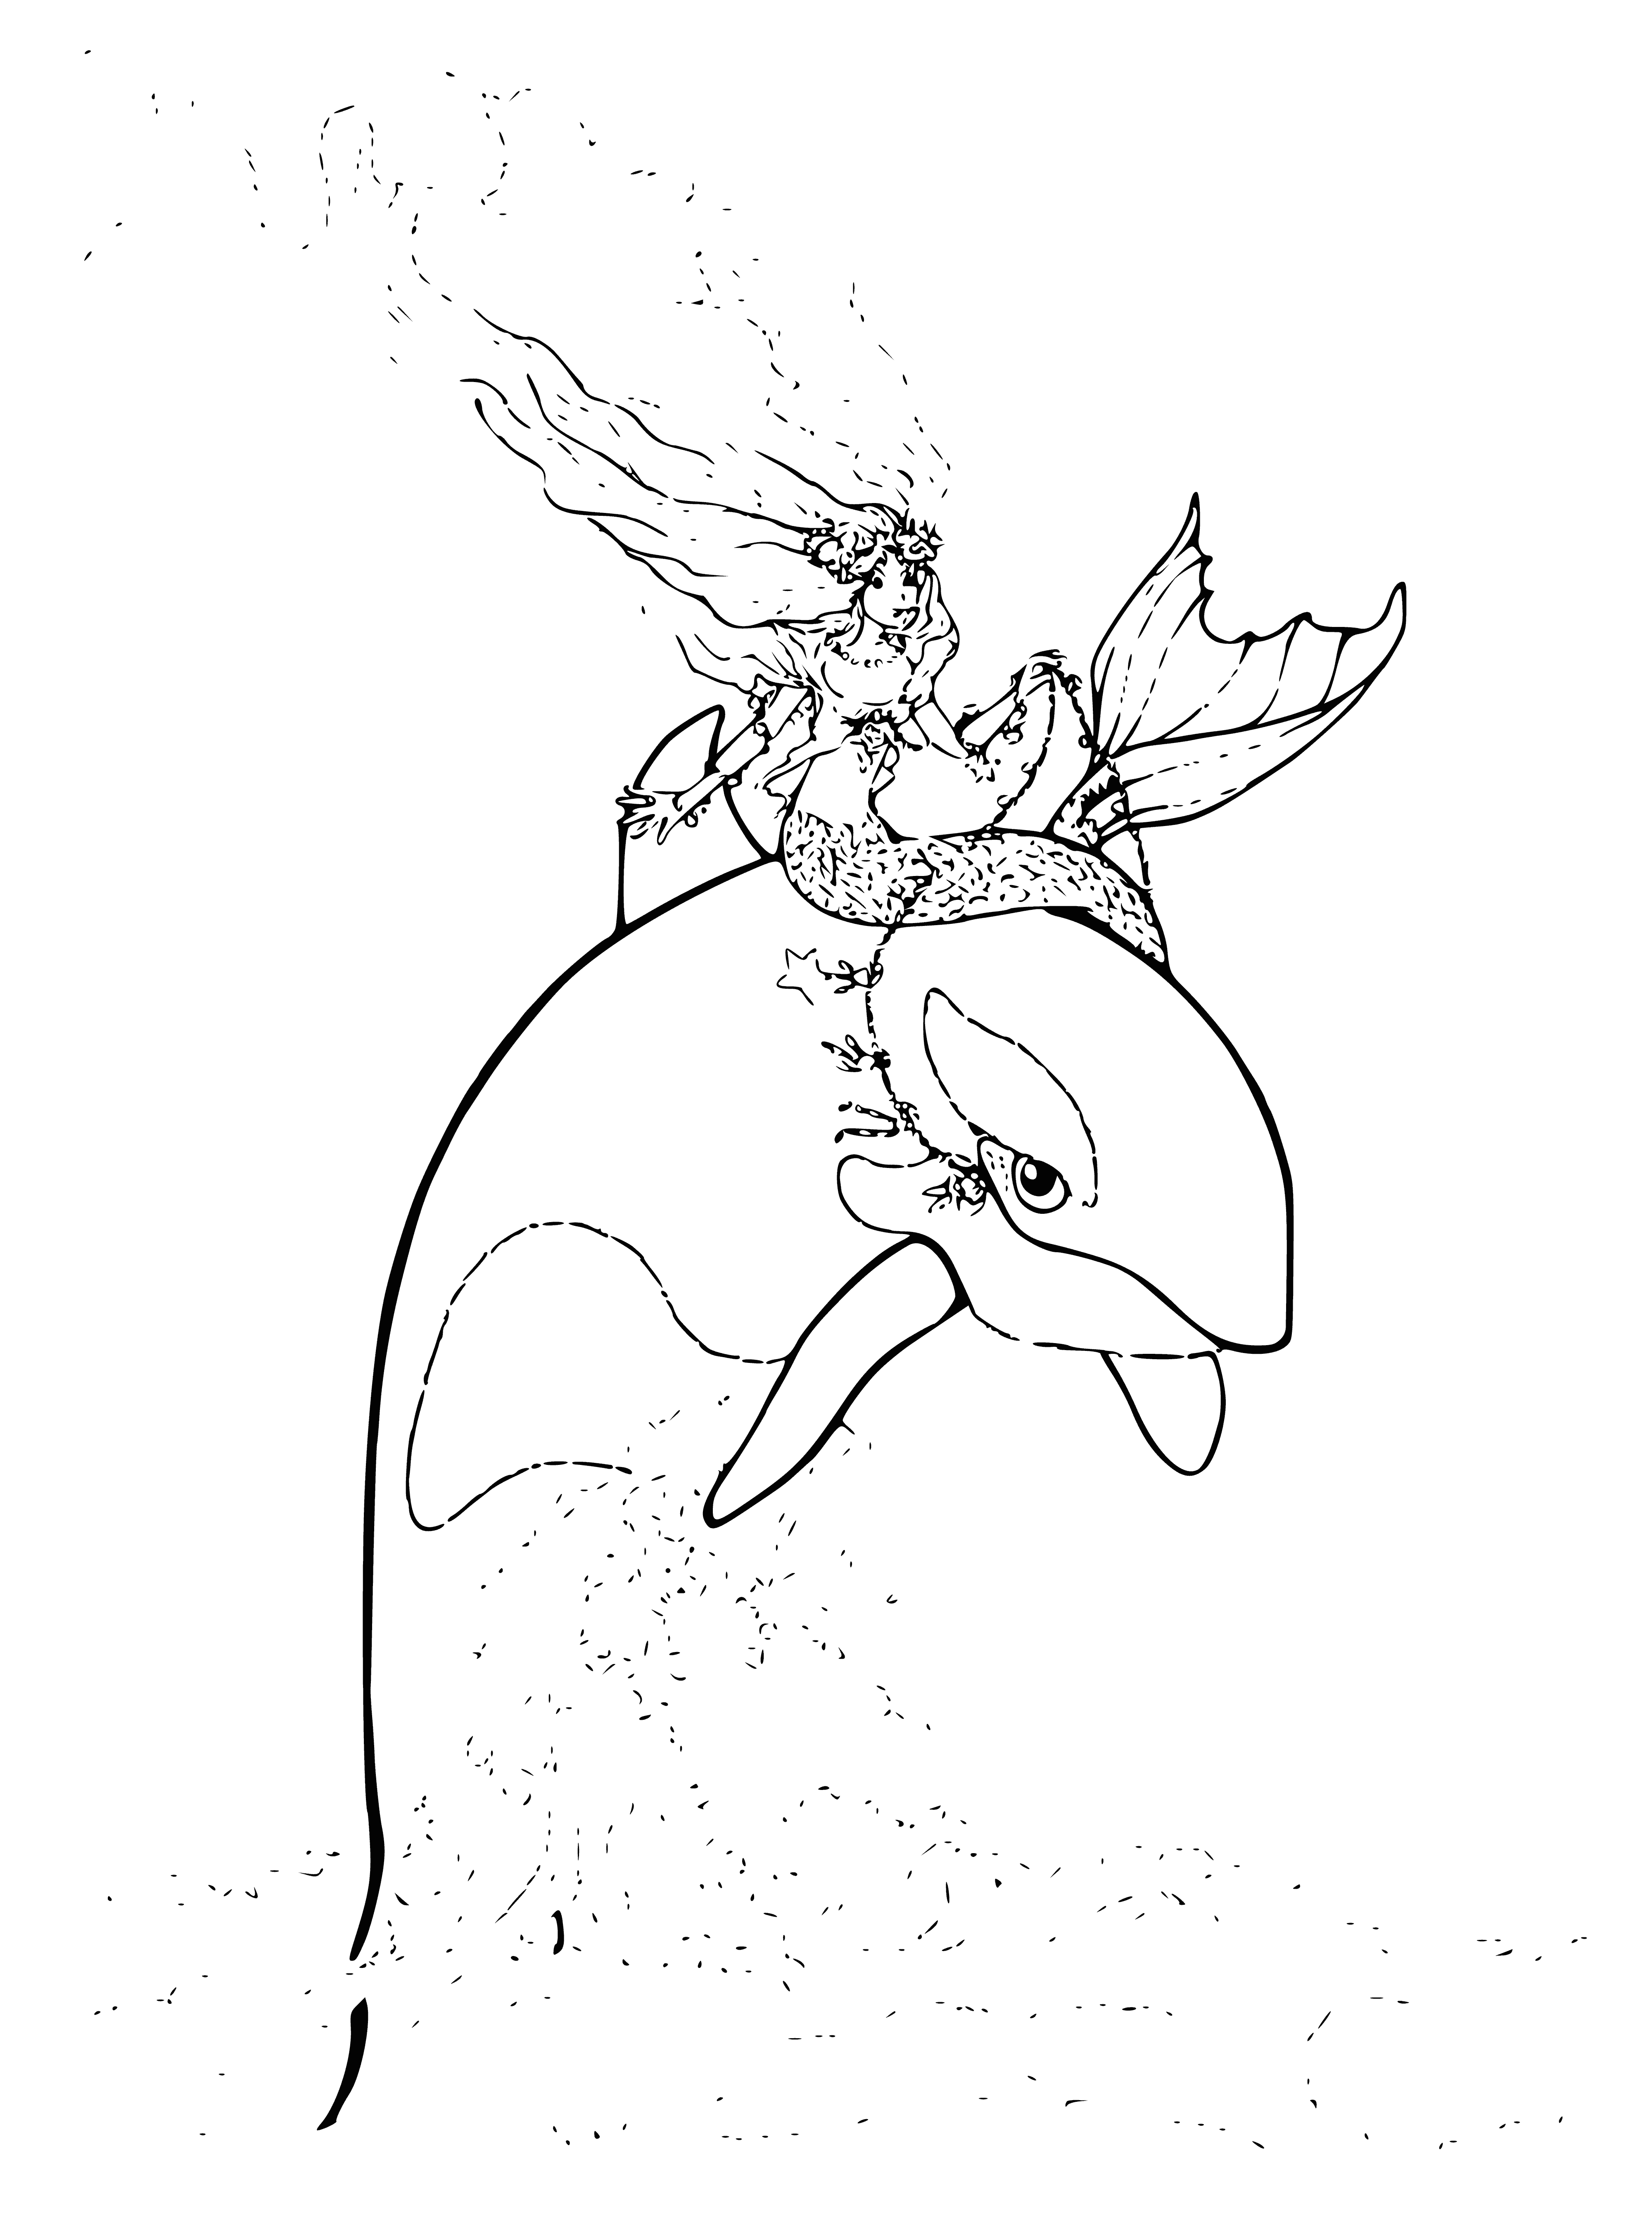 coloring page: Mermaids/Sirens are half human and fish: woman upper, fish lower, often riding whales.